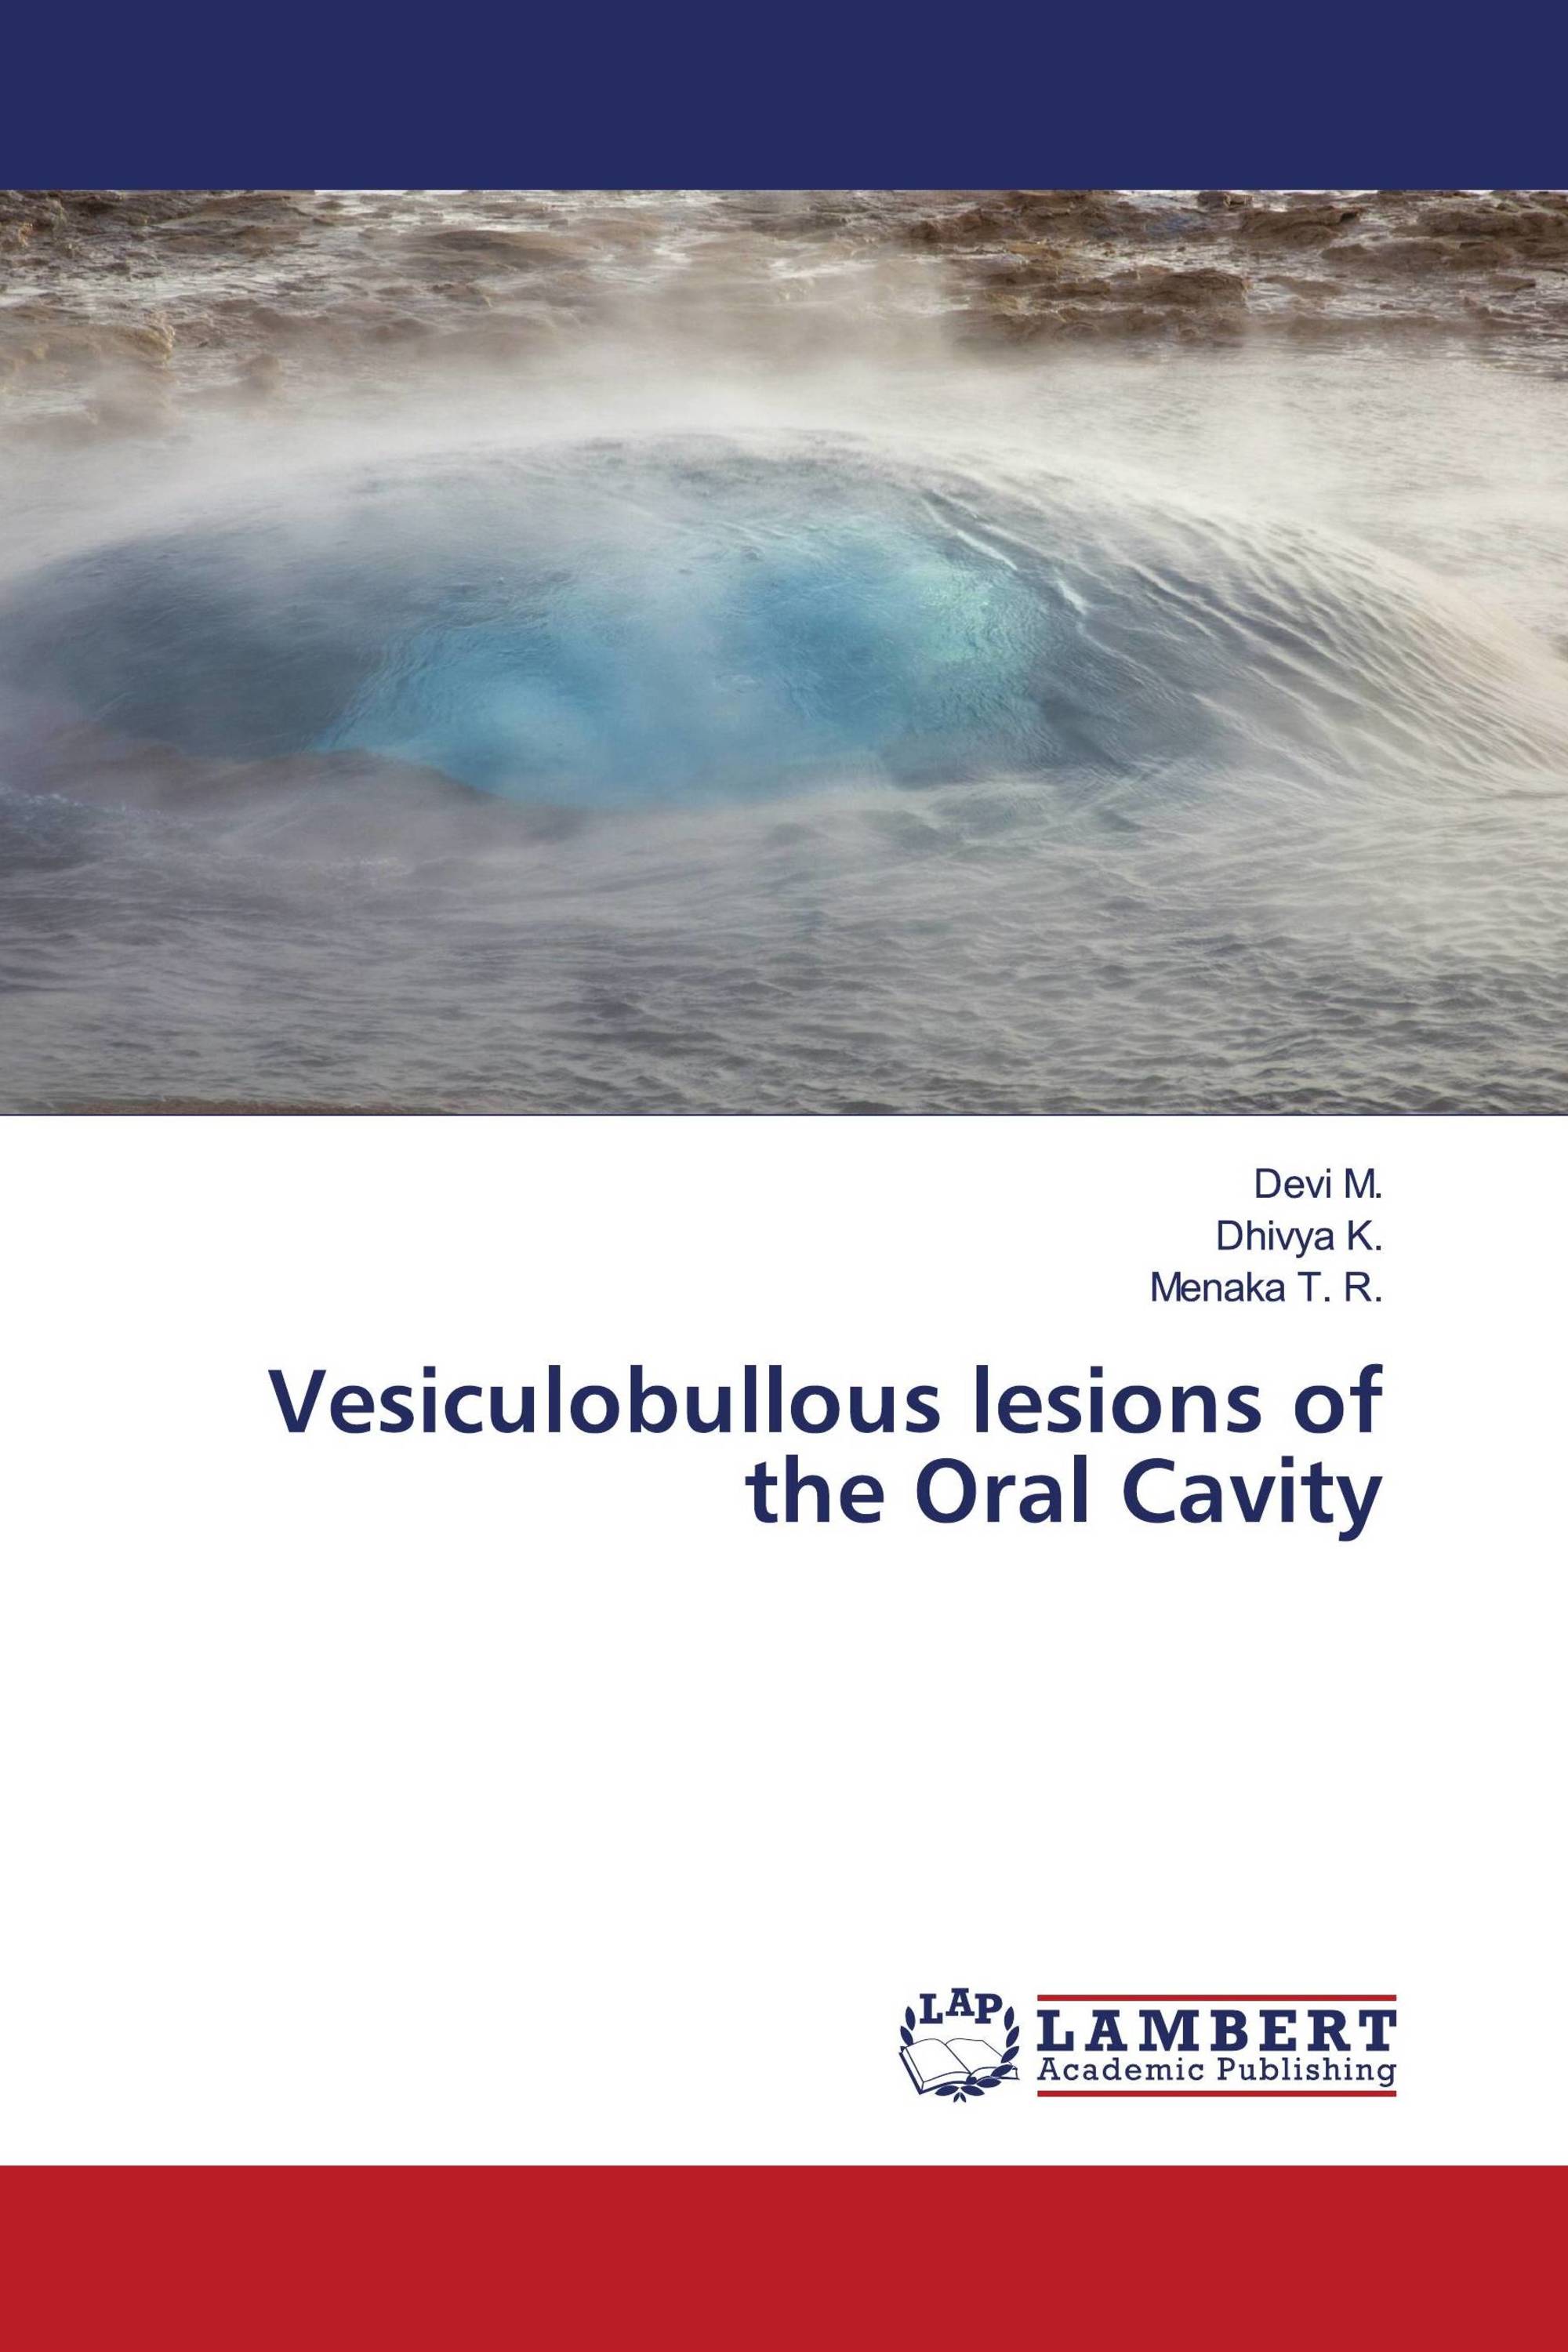 Vesiculobullous lesions of the Oral Cavity